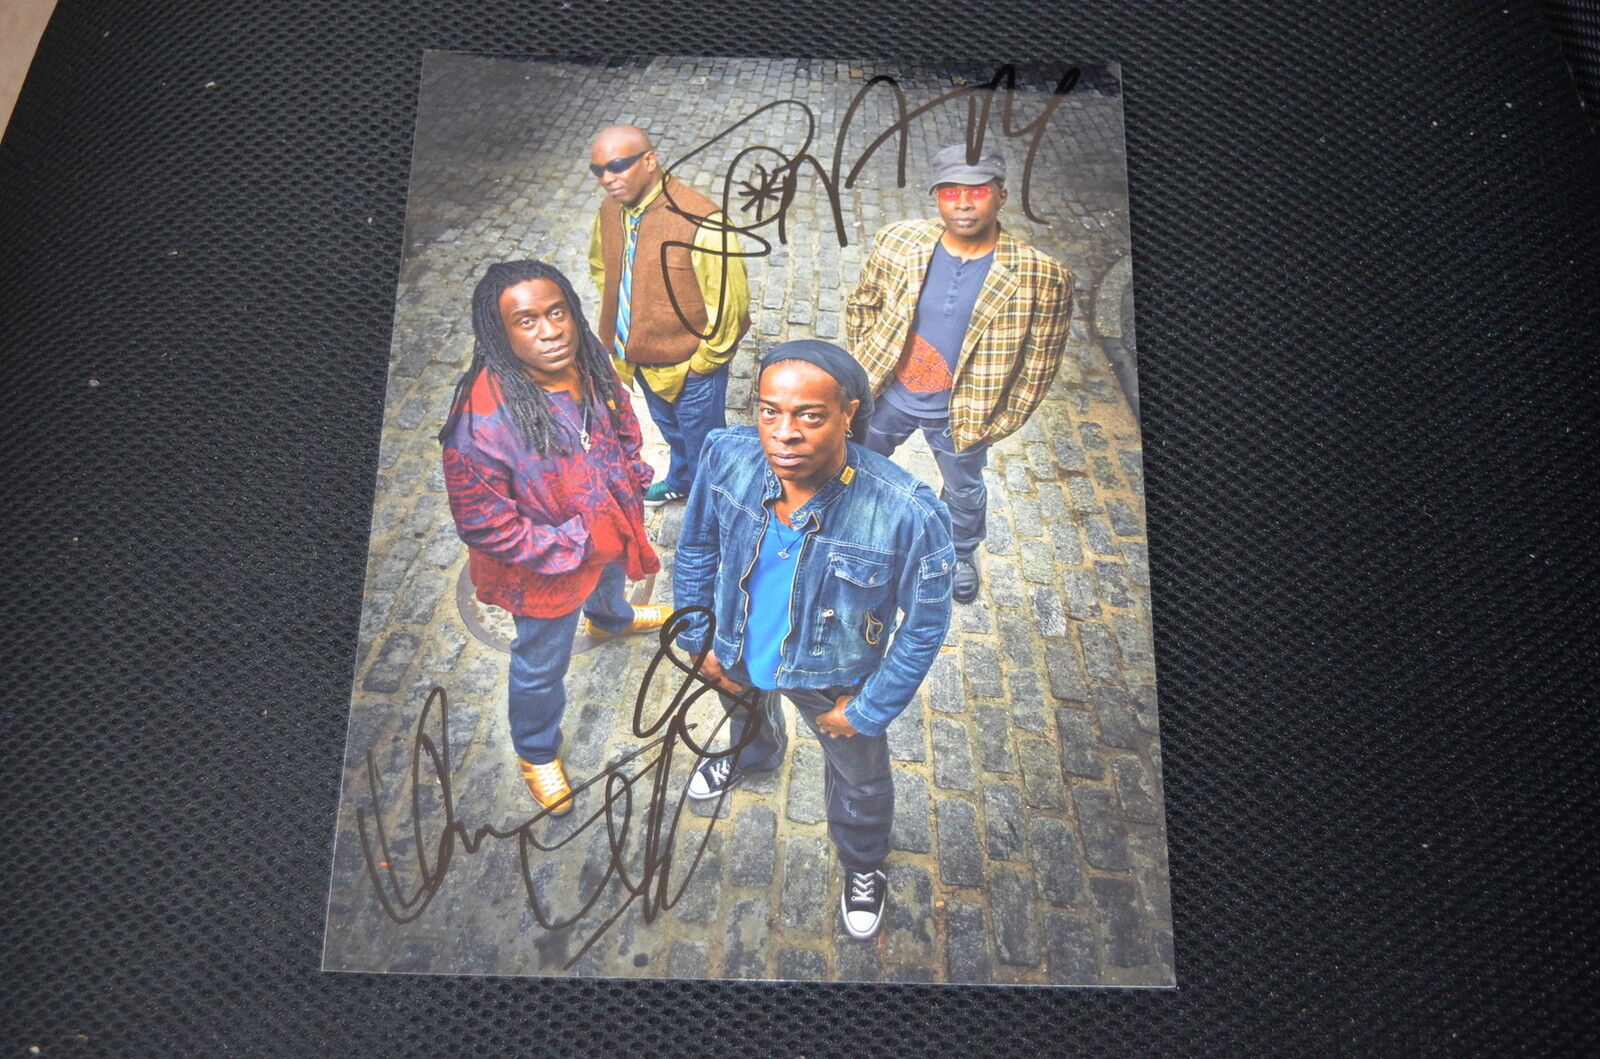 LIVING COLOUR signed autograph In Person 8x10 (20x25 cm) full band